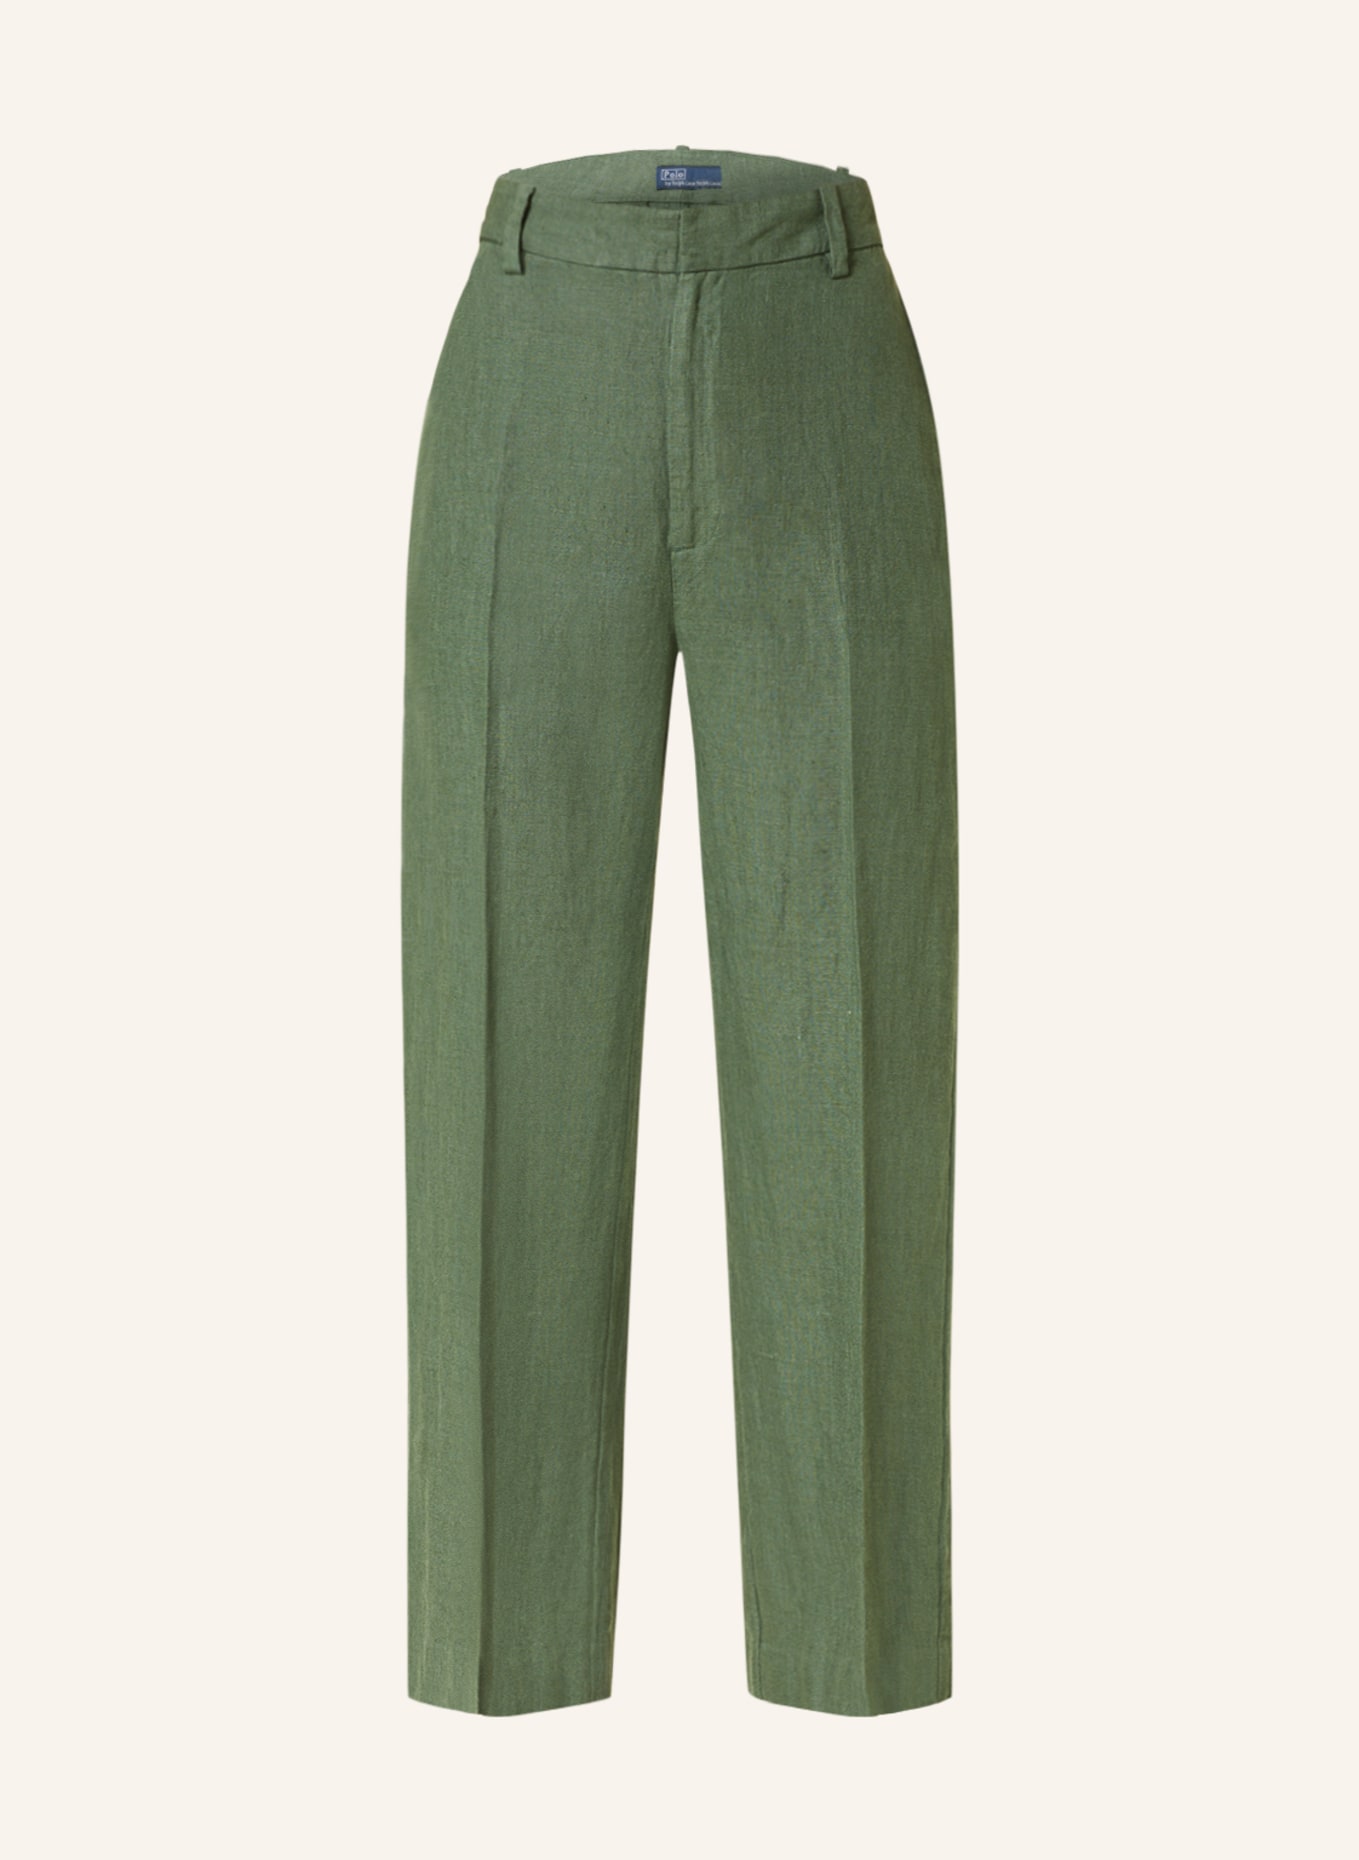 POLO RALPH LAUREN 7/8 pants made of linen, Color: GREEN(Image null)